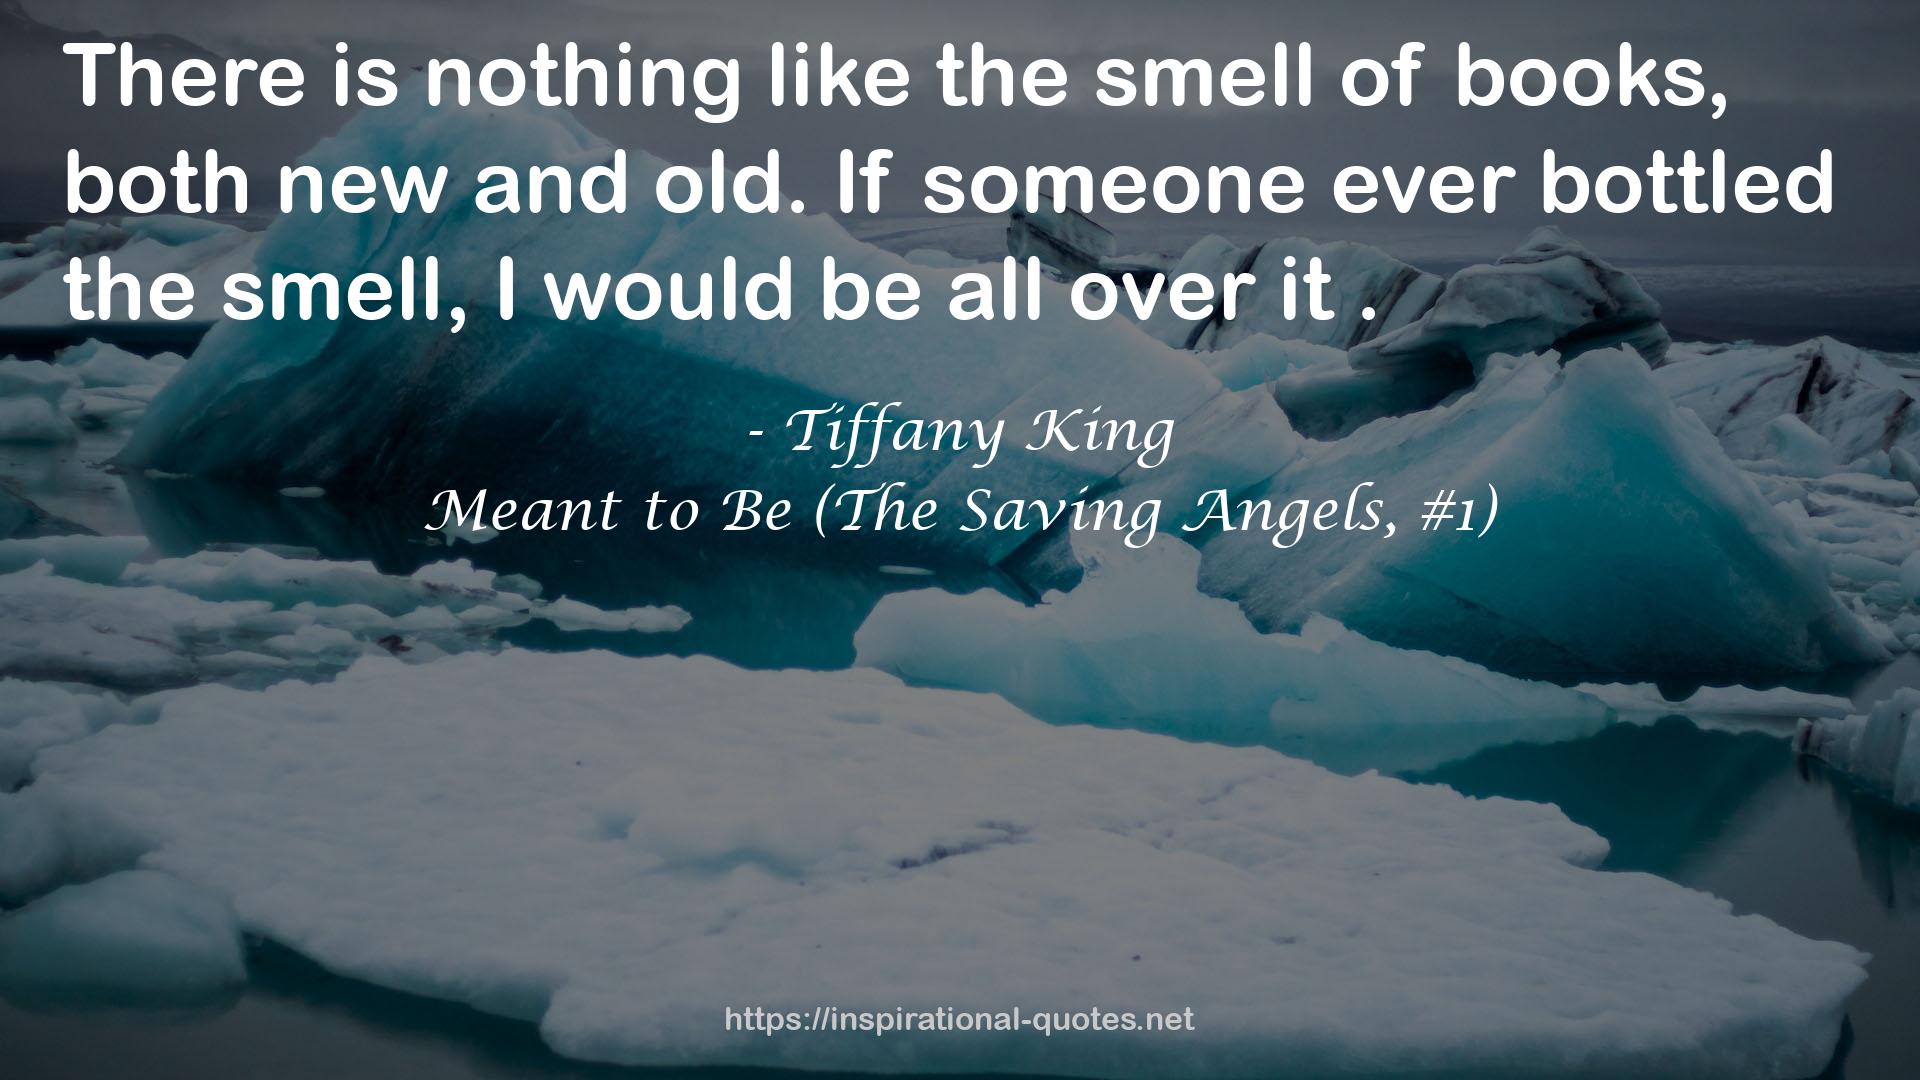 Meant to Be (The Saving Angels, #1) QUOTES